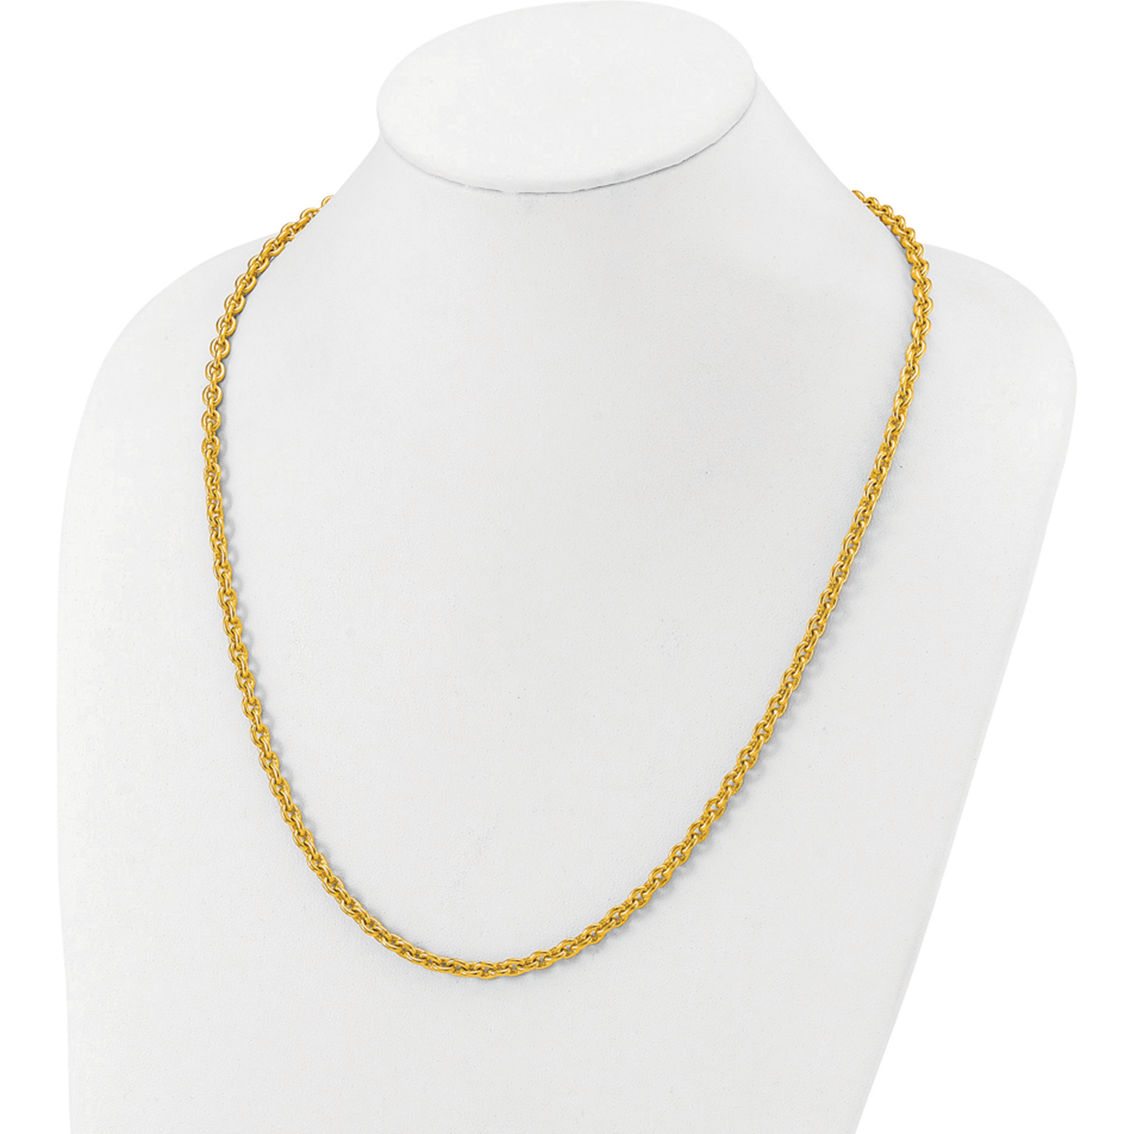 24K Pure Gold 24K Yellow Gold 5.4mm Solid Open Oval Link 20 in. Chain - Image 4 of 5